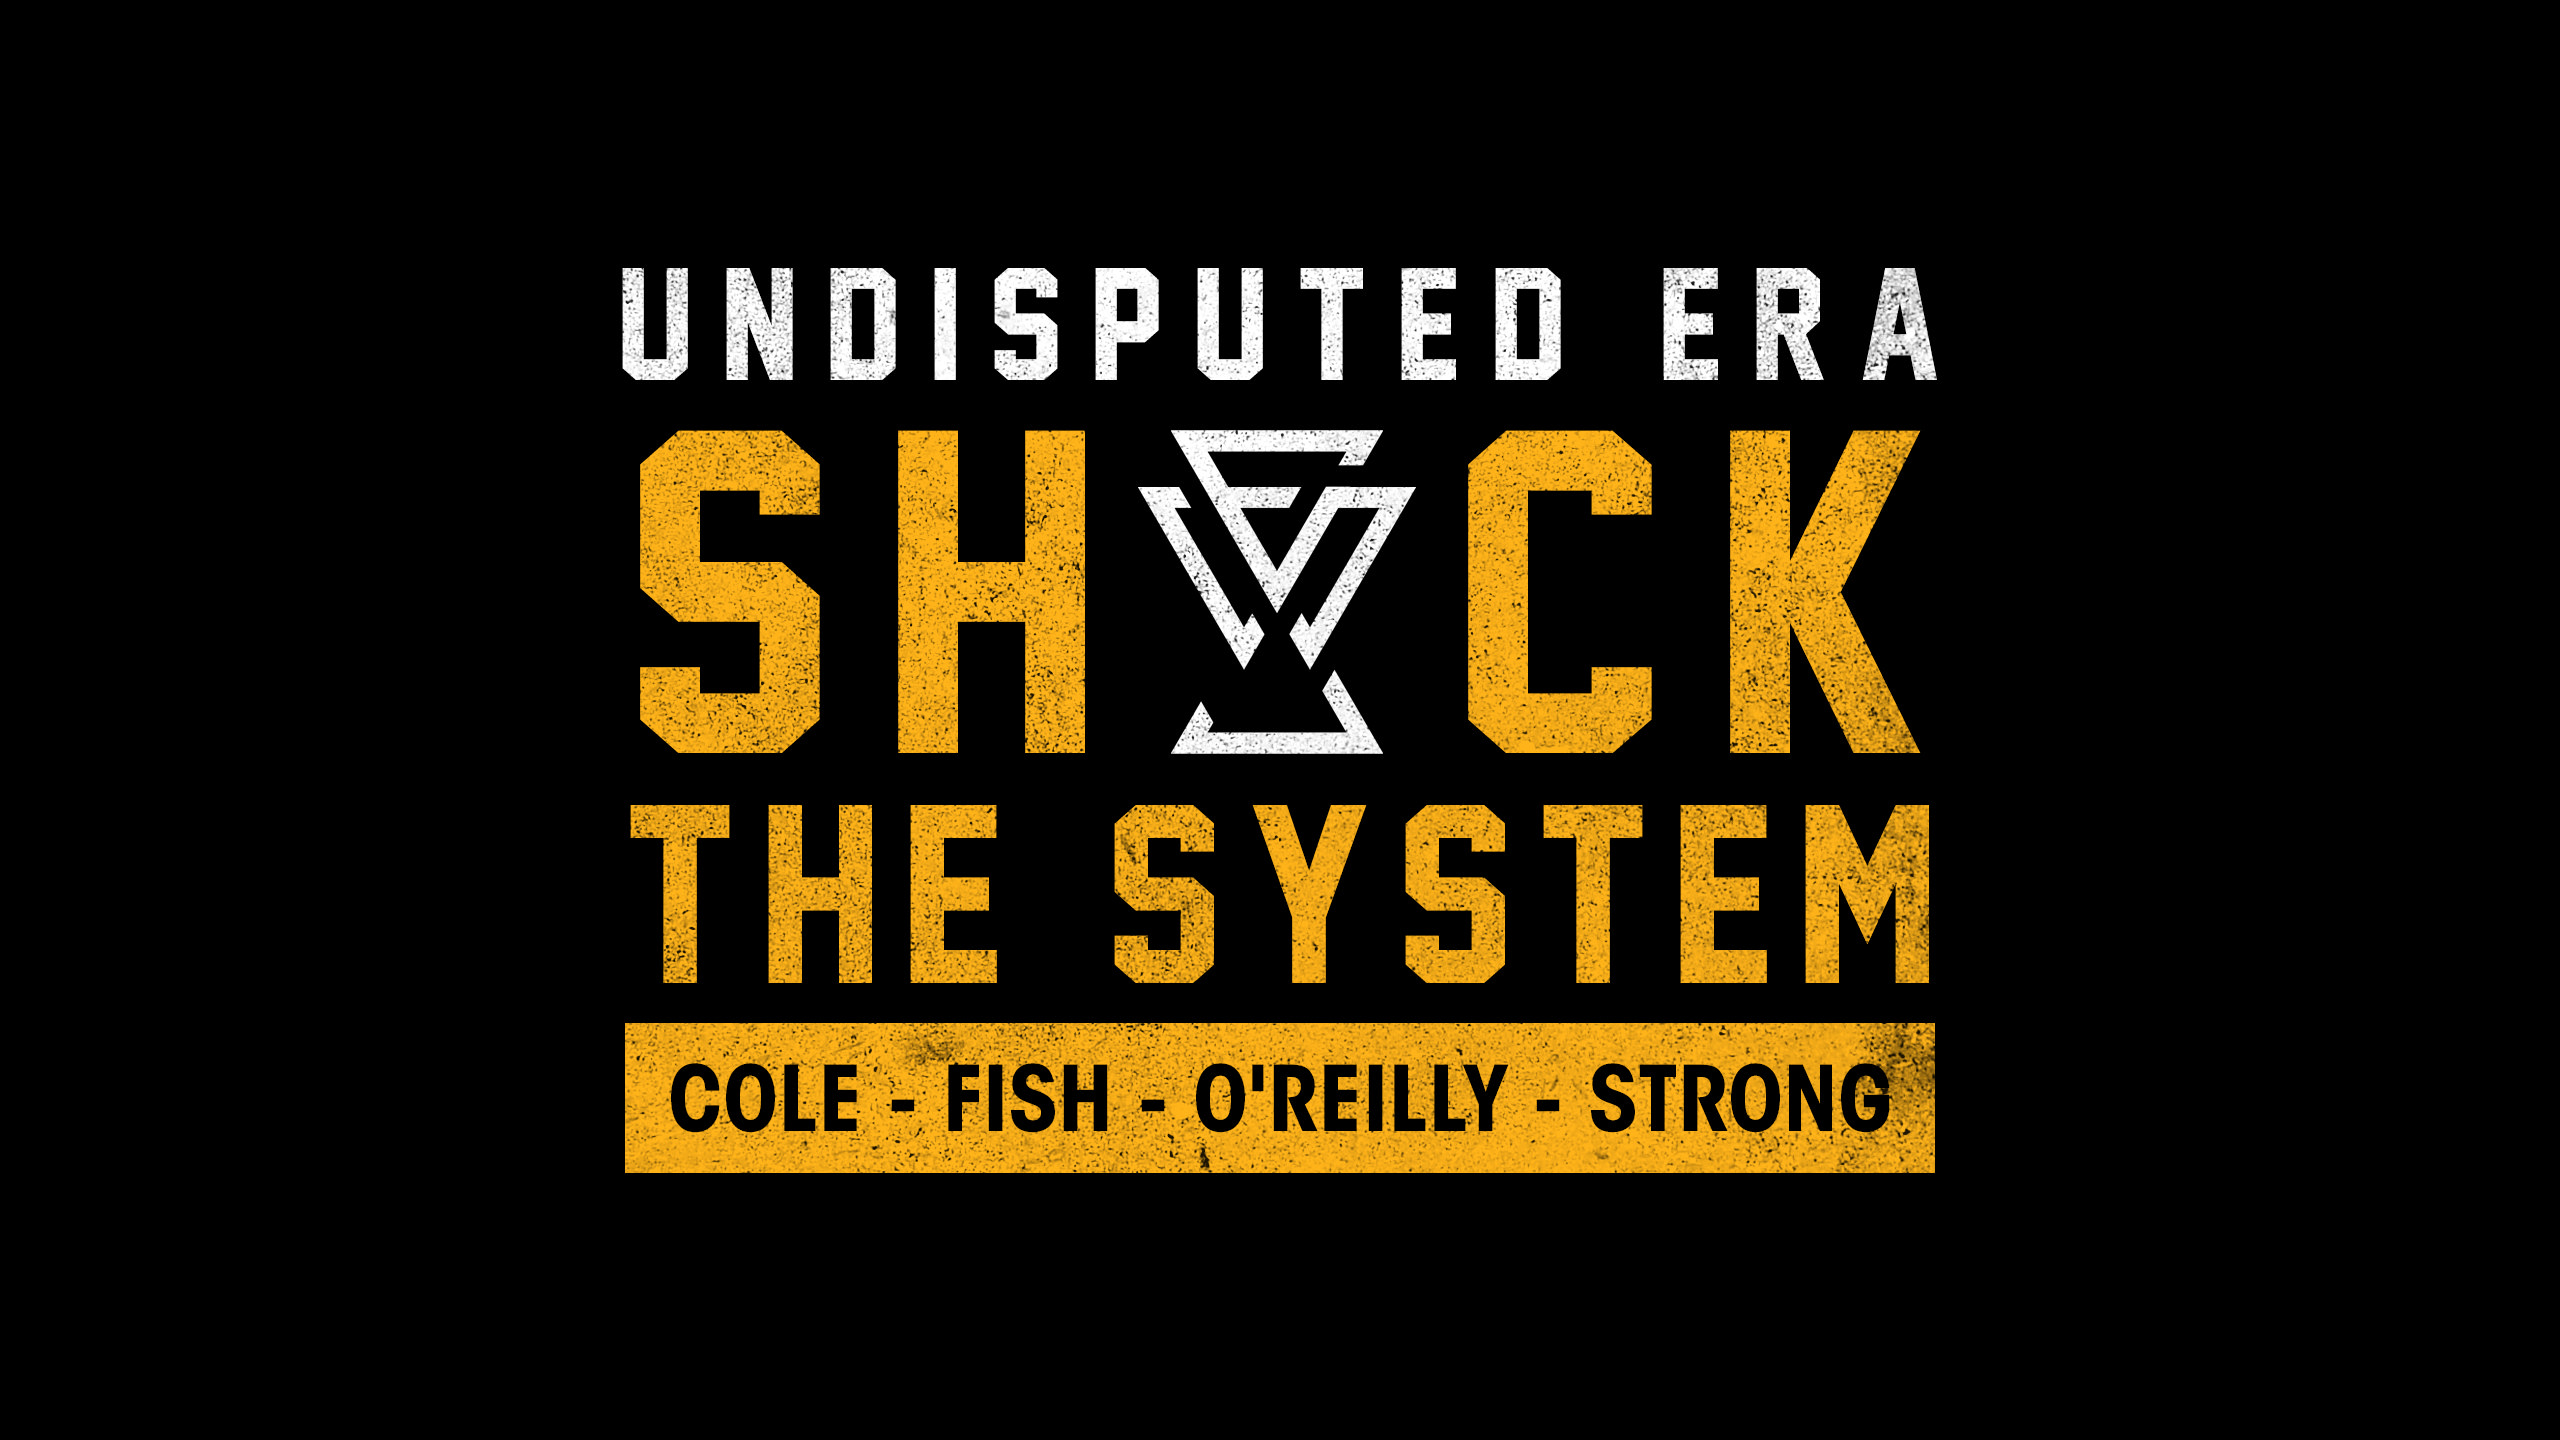 Undisputed Era Shock The System